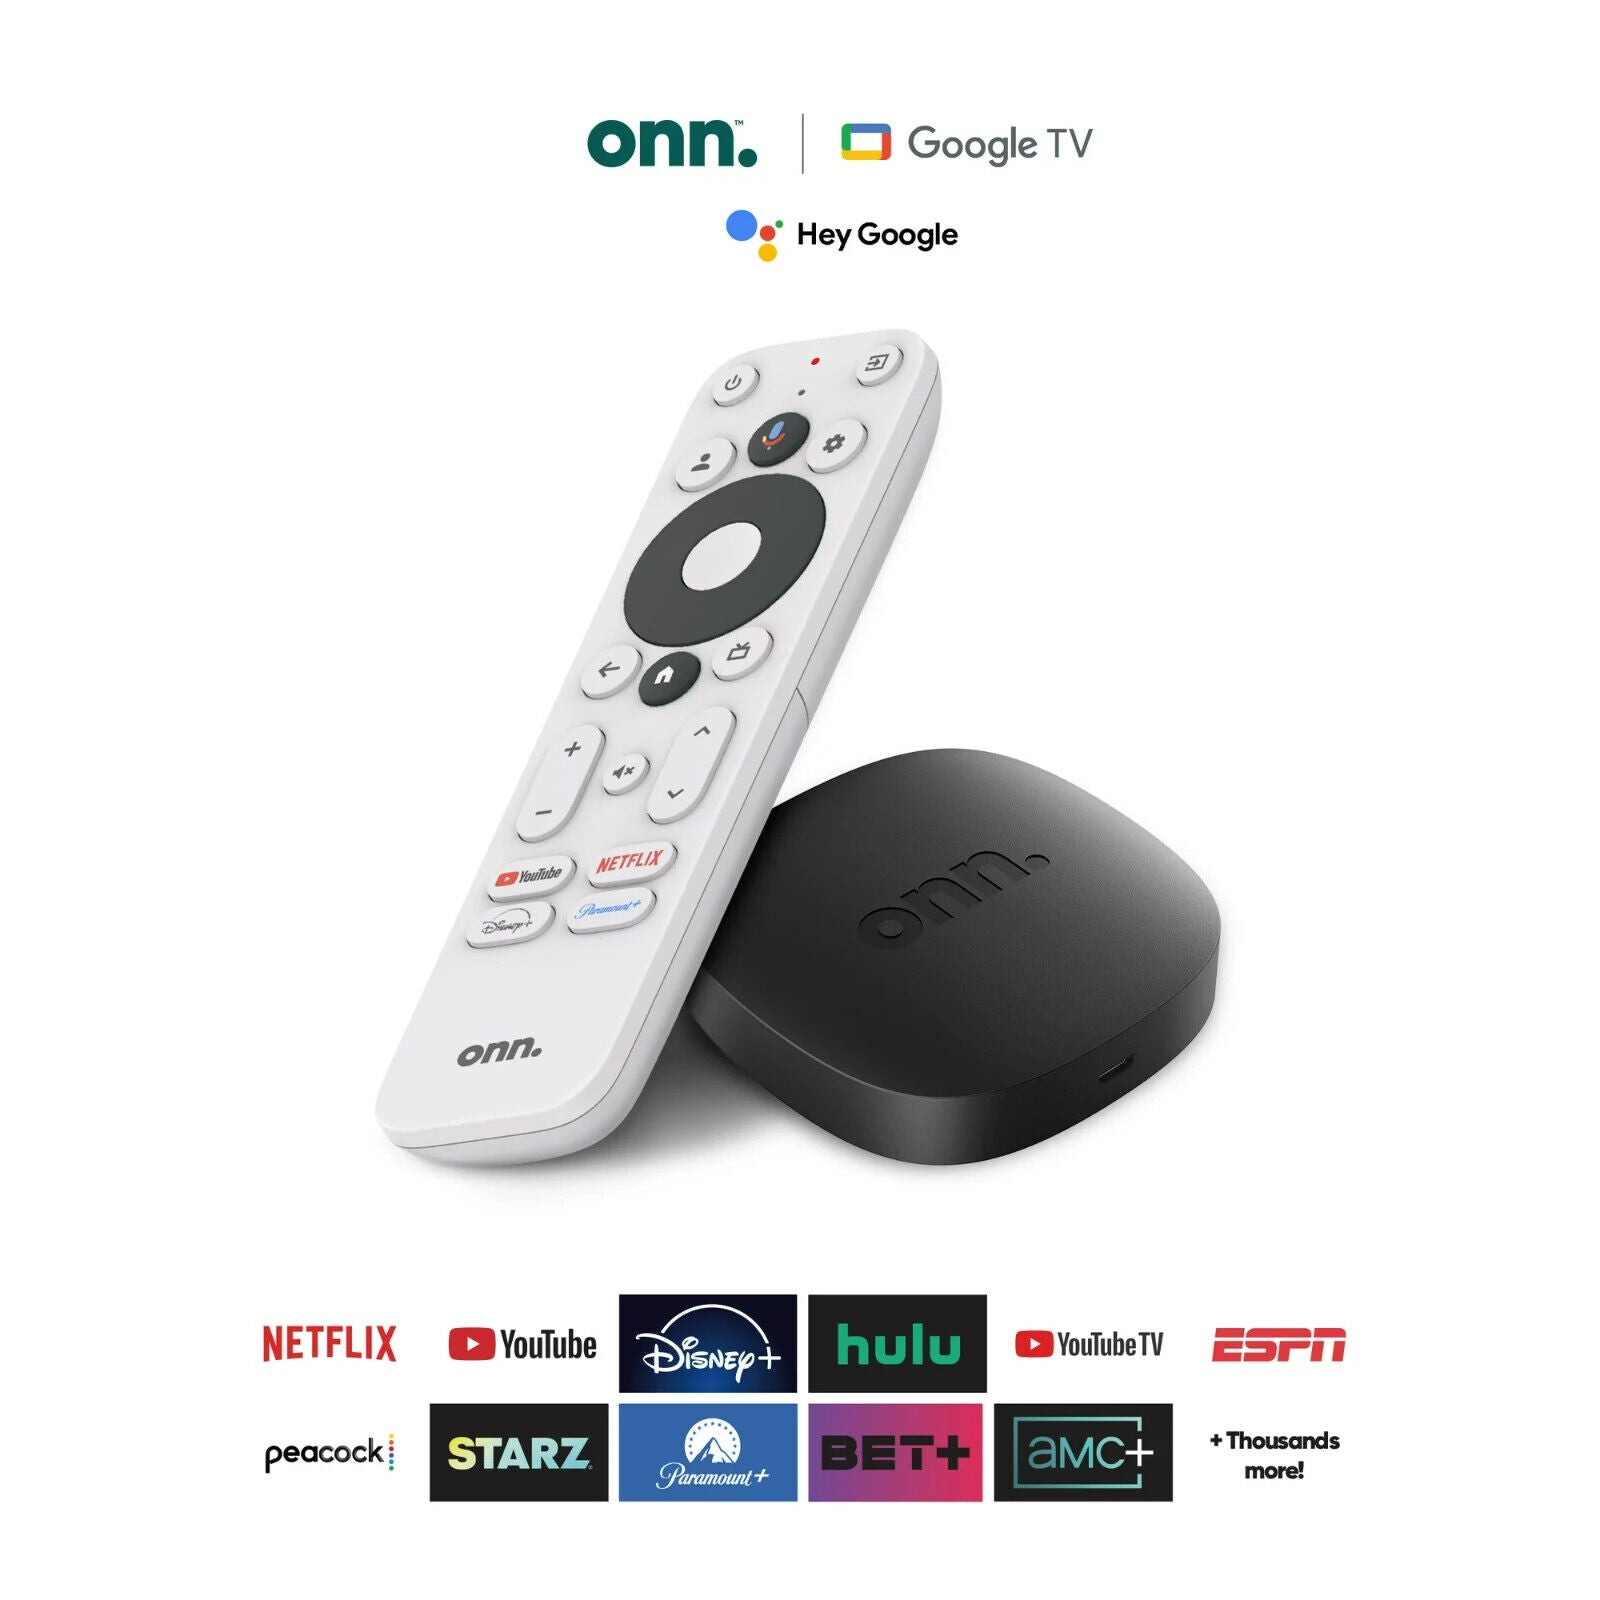 Onn Android Google TV 4K UHD Streaming Box w/ Voice Remote Control & HDMI Cable